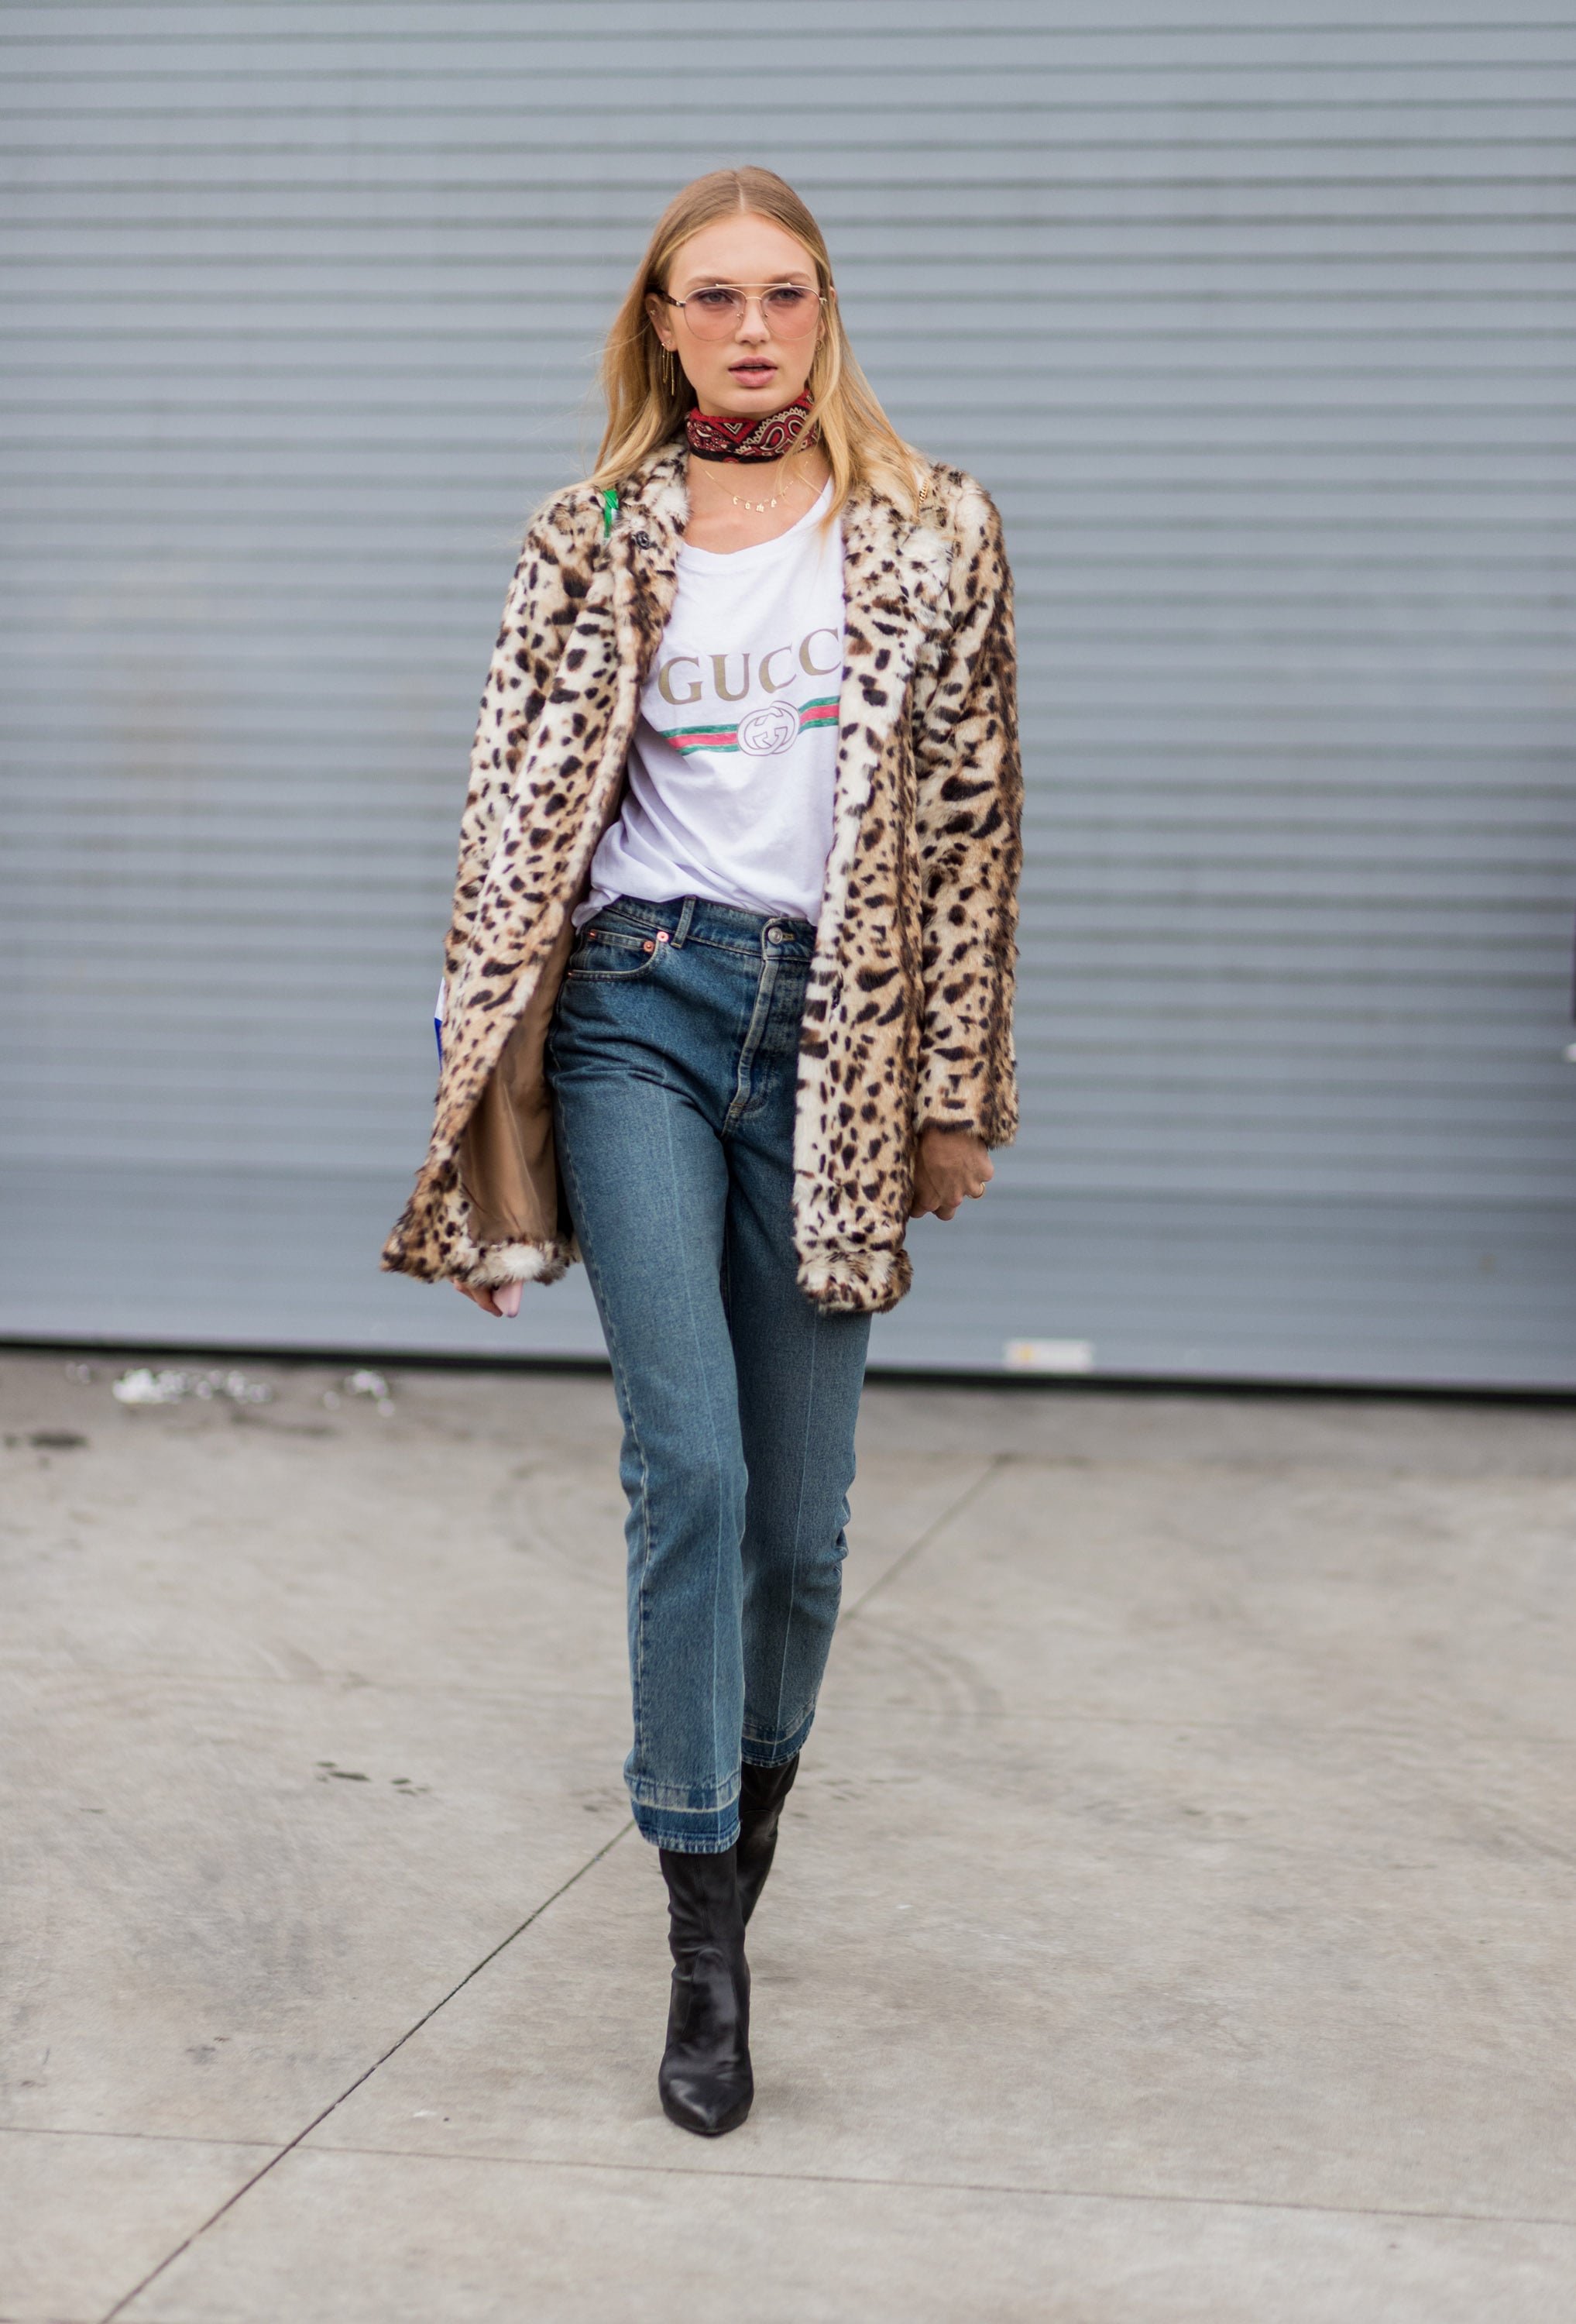 How to Wear Cheetah Print ? 12 Outfit Ideas